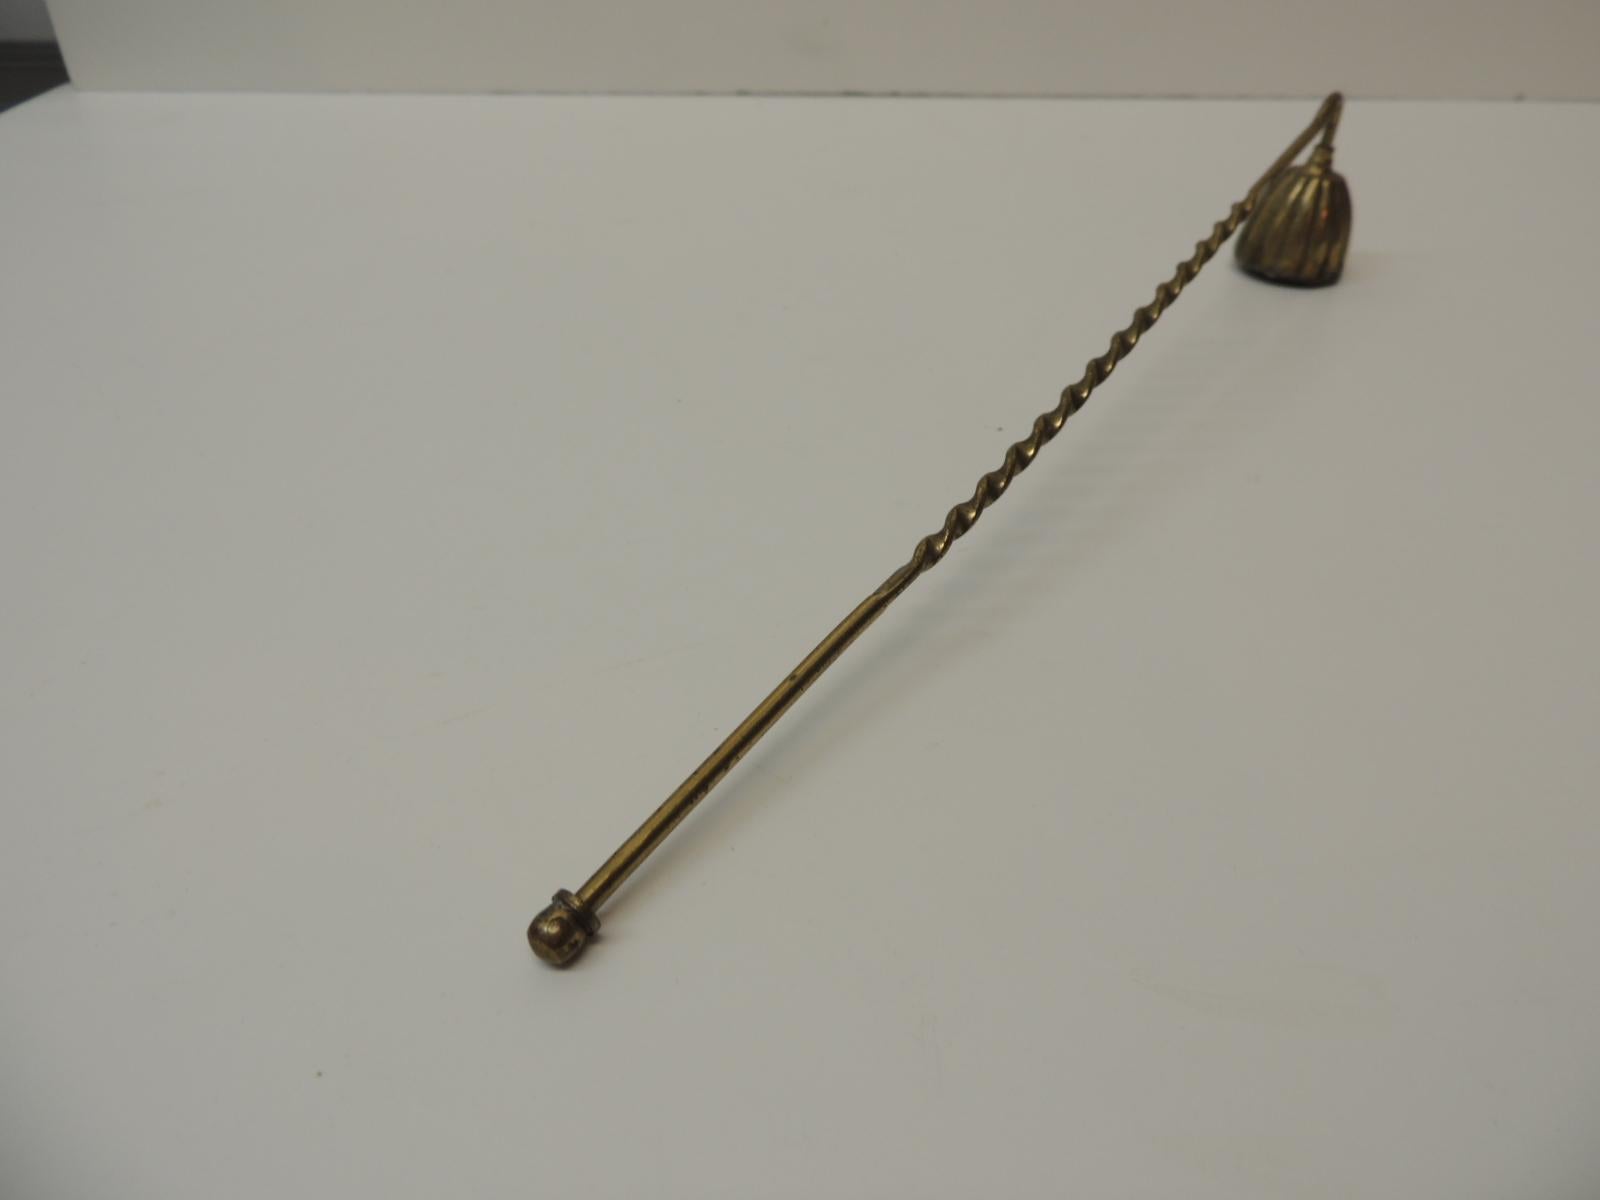 antique brass candle snuffer